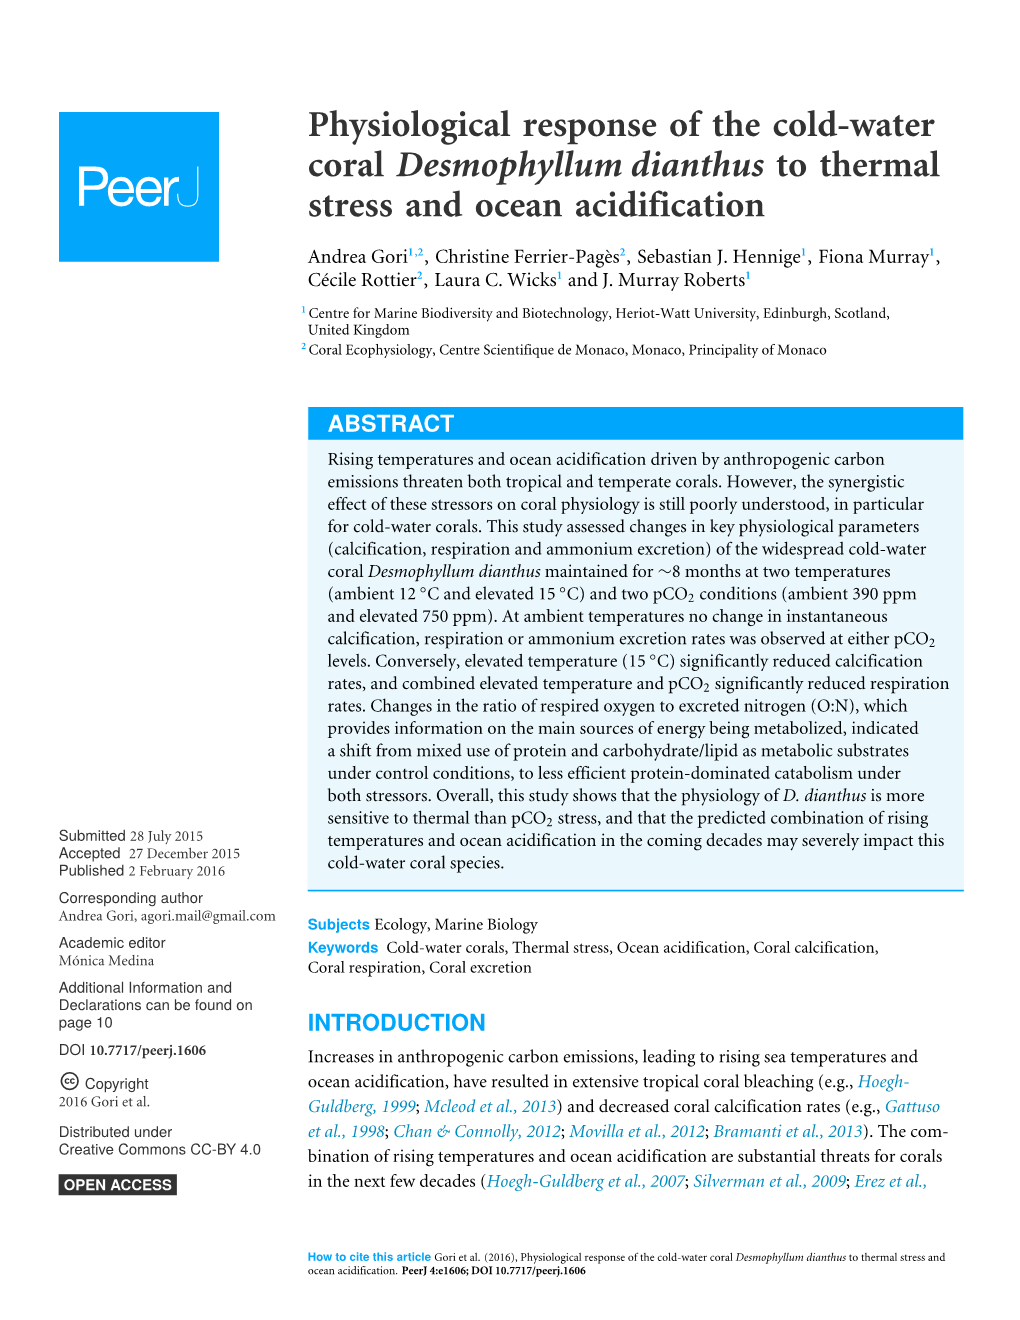 Physiological Response of the Cold-Water Coral Desmophyllum Dianthus to Thermal Stress and Ocean Acidification